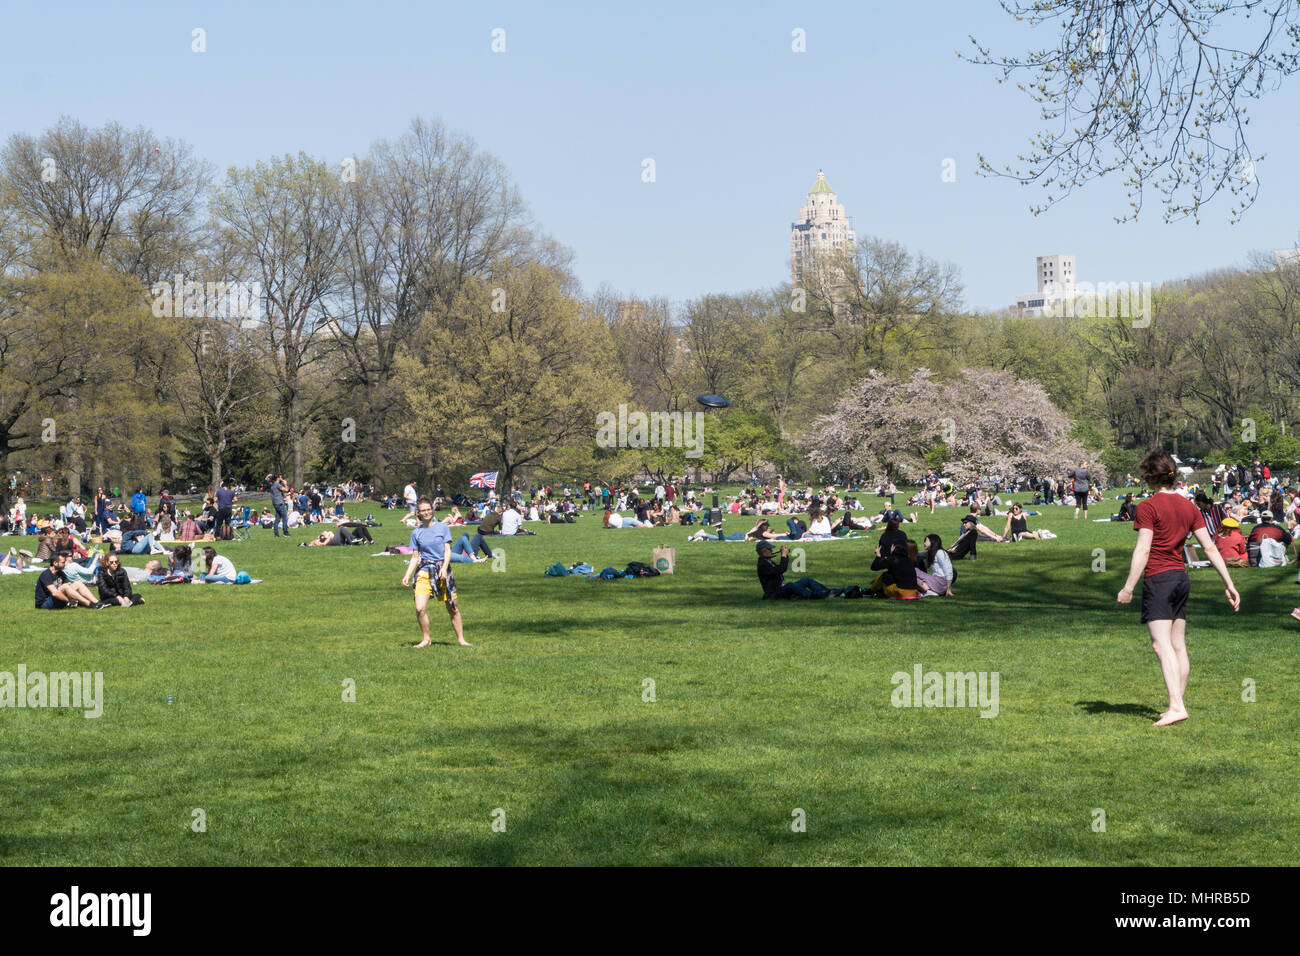 People Enjoying Leisure Activities at the Sheep Meadow in Central Park ...